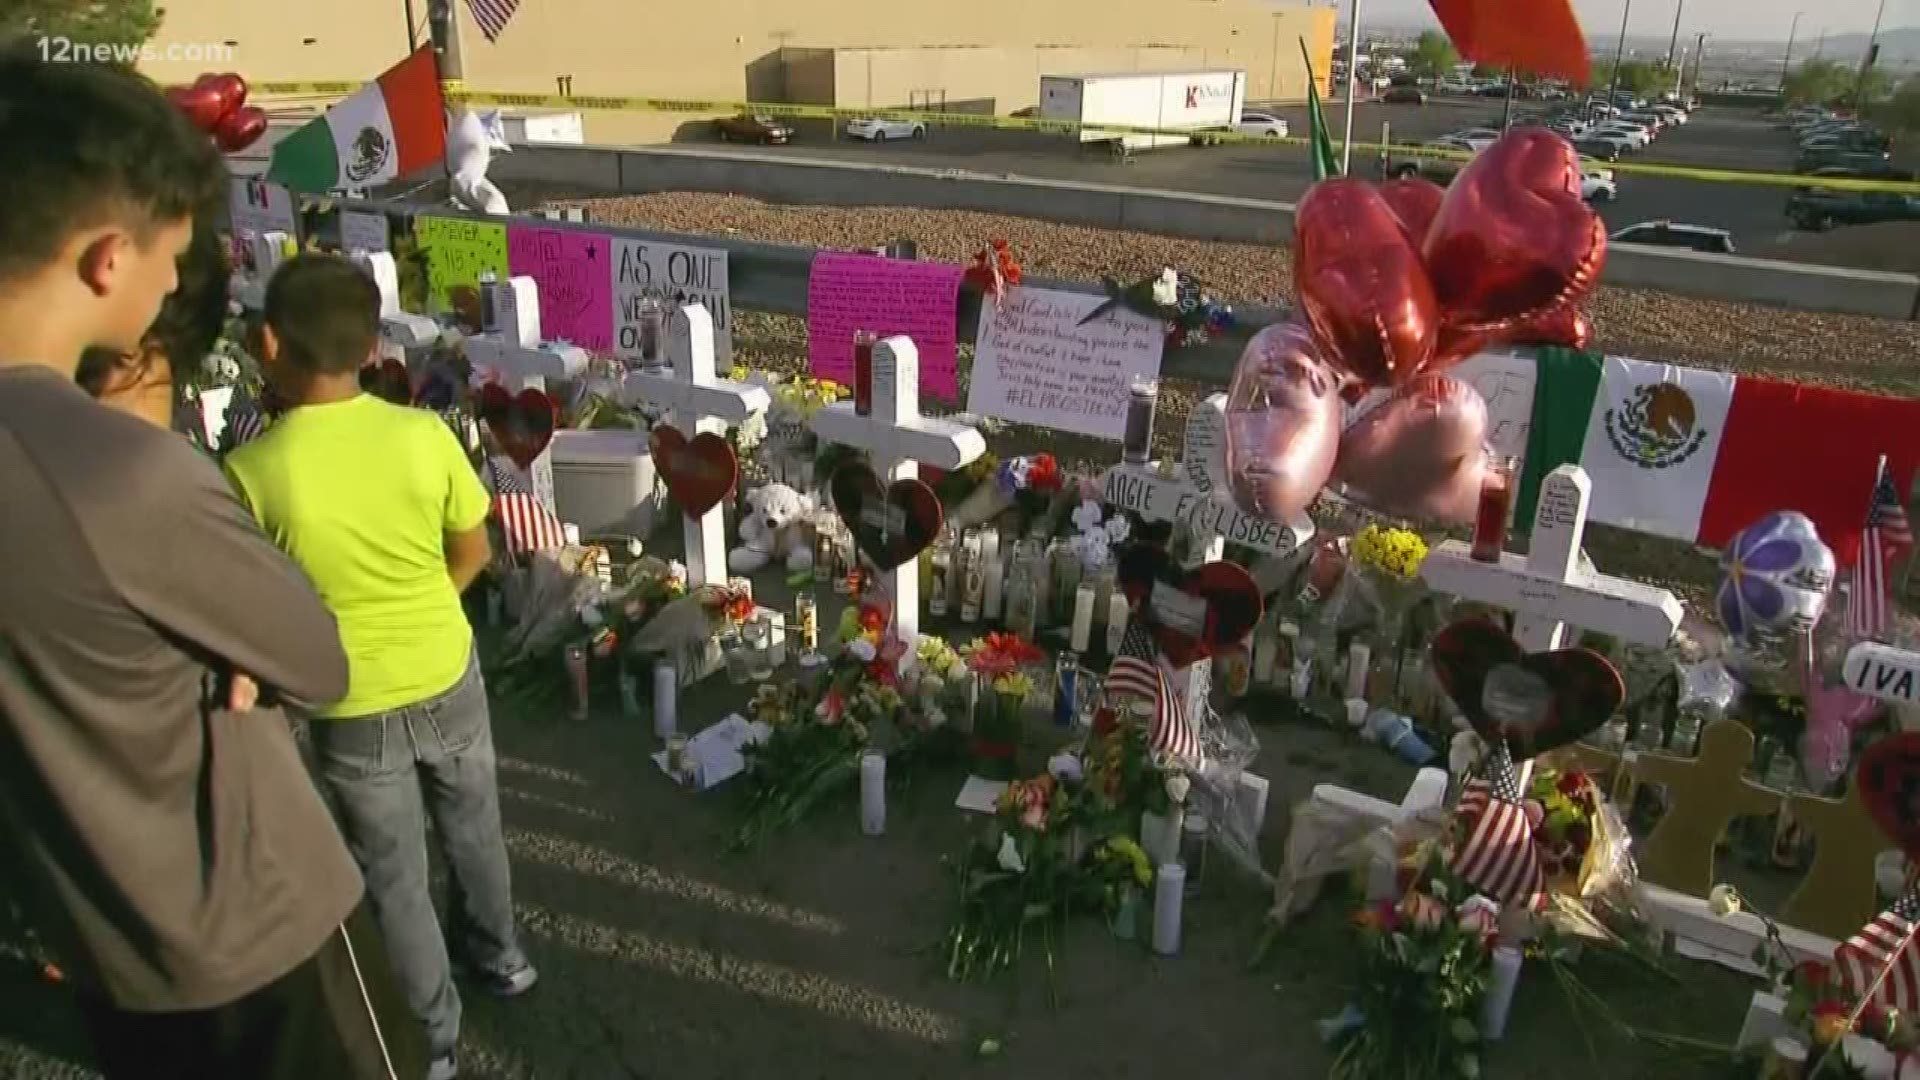 The El Paso community continues to find ways to honor the 22 people who were killed after a gunman opened fire in a popular Walmart over the weekend.